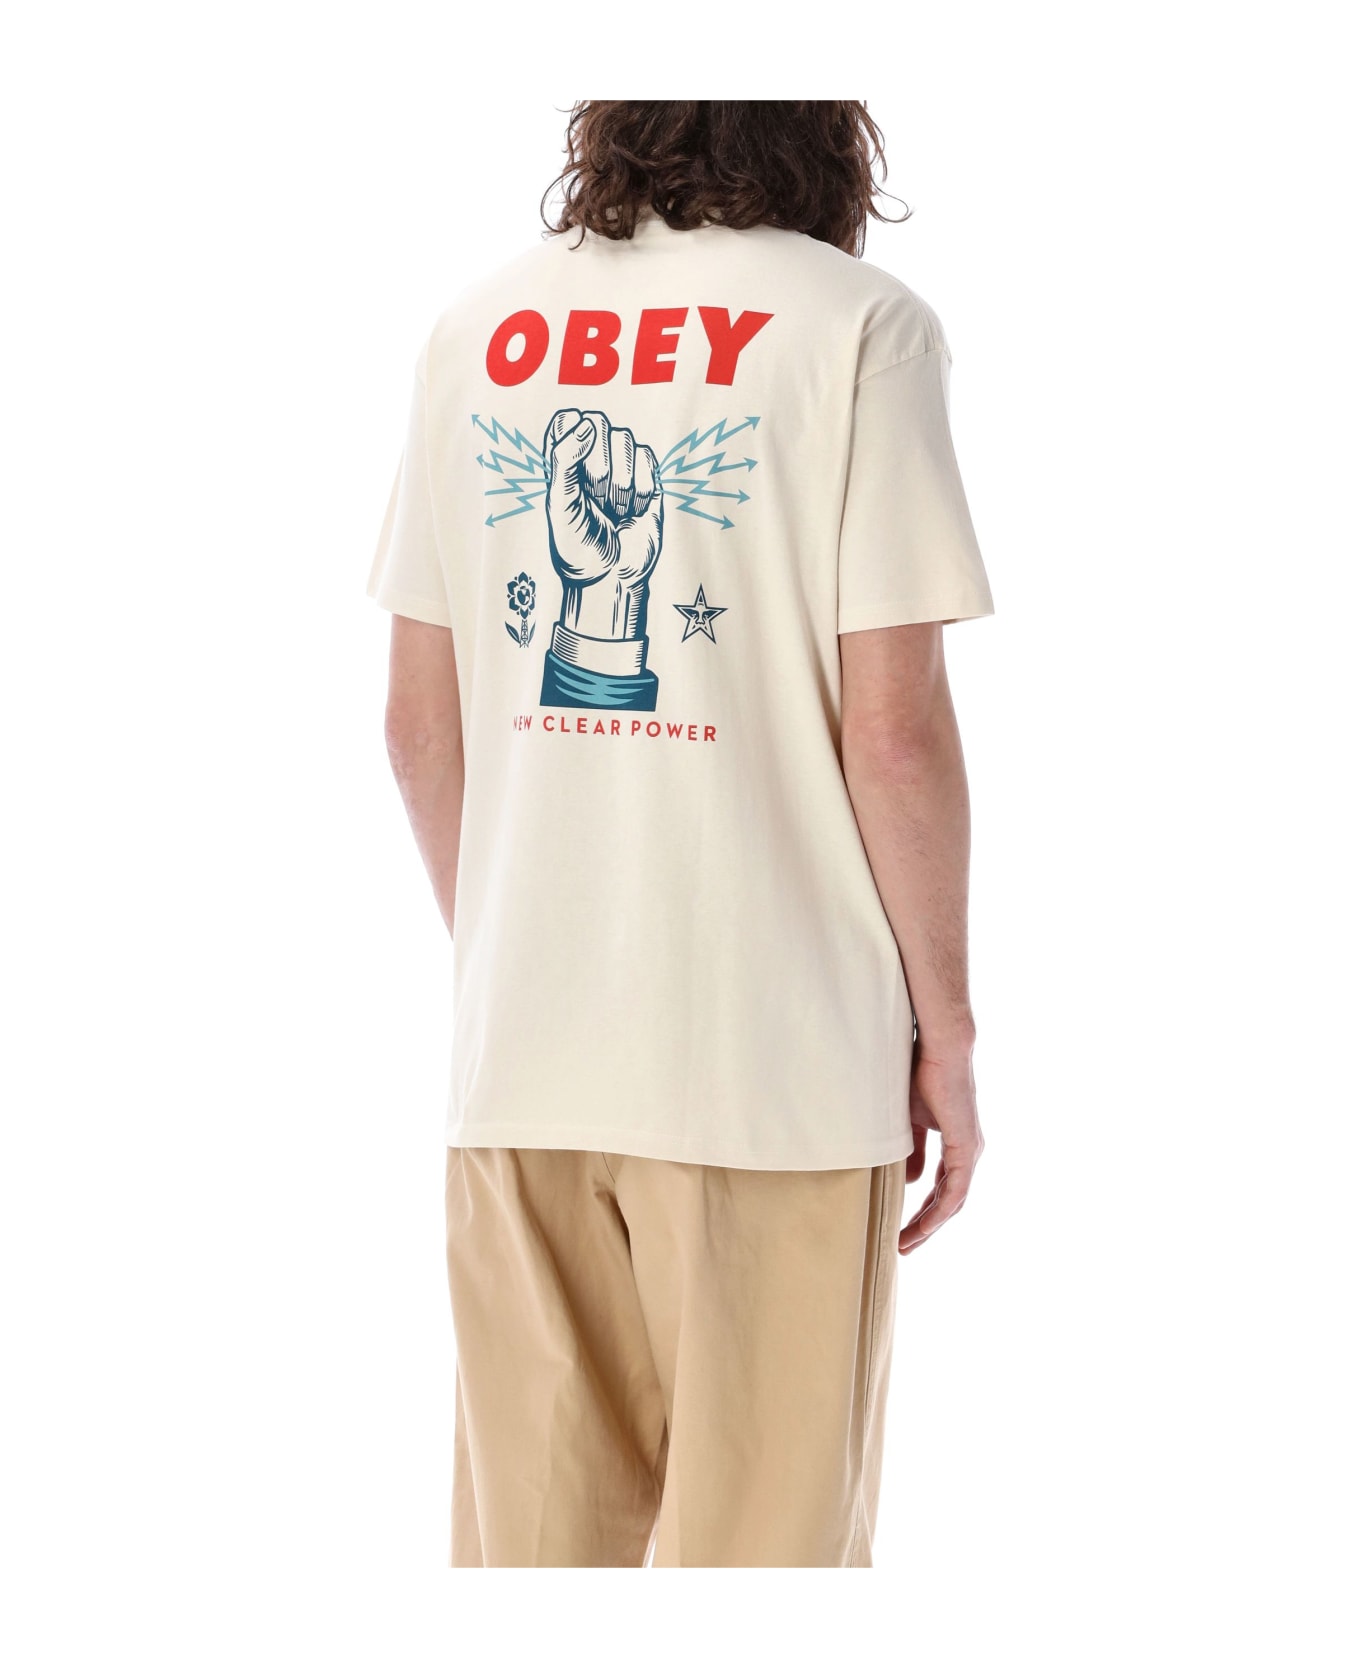 Obey New Clear Power T-shirt - CREAM